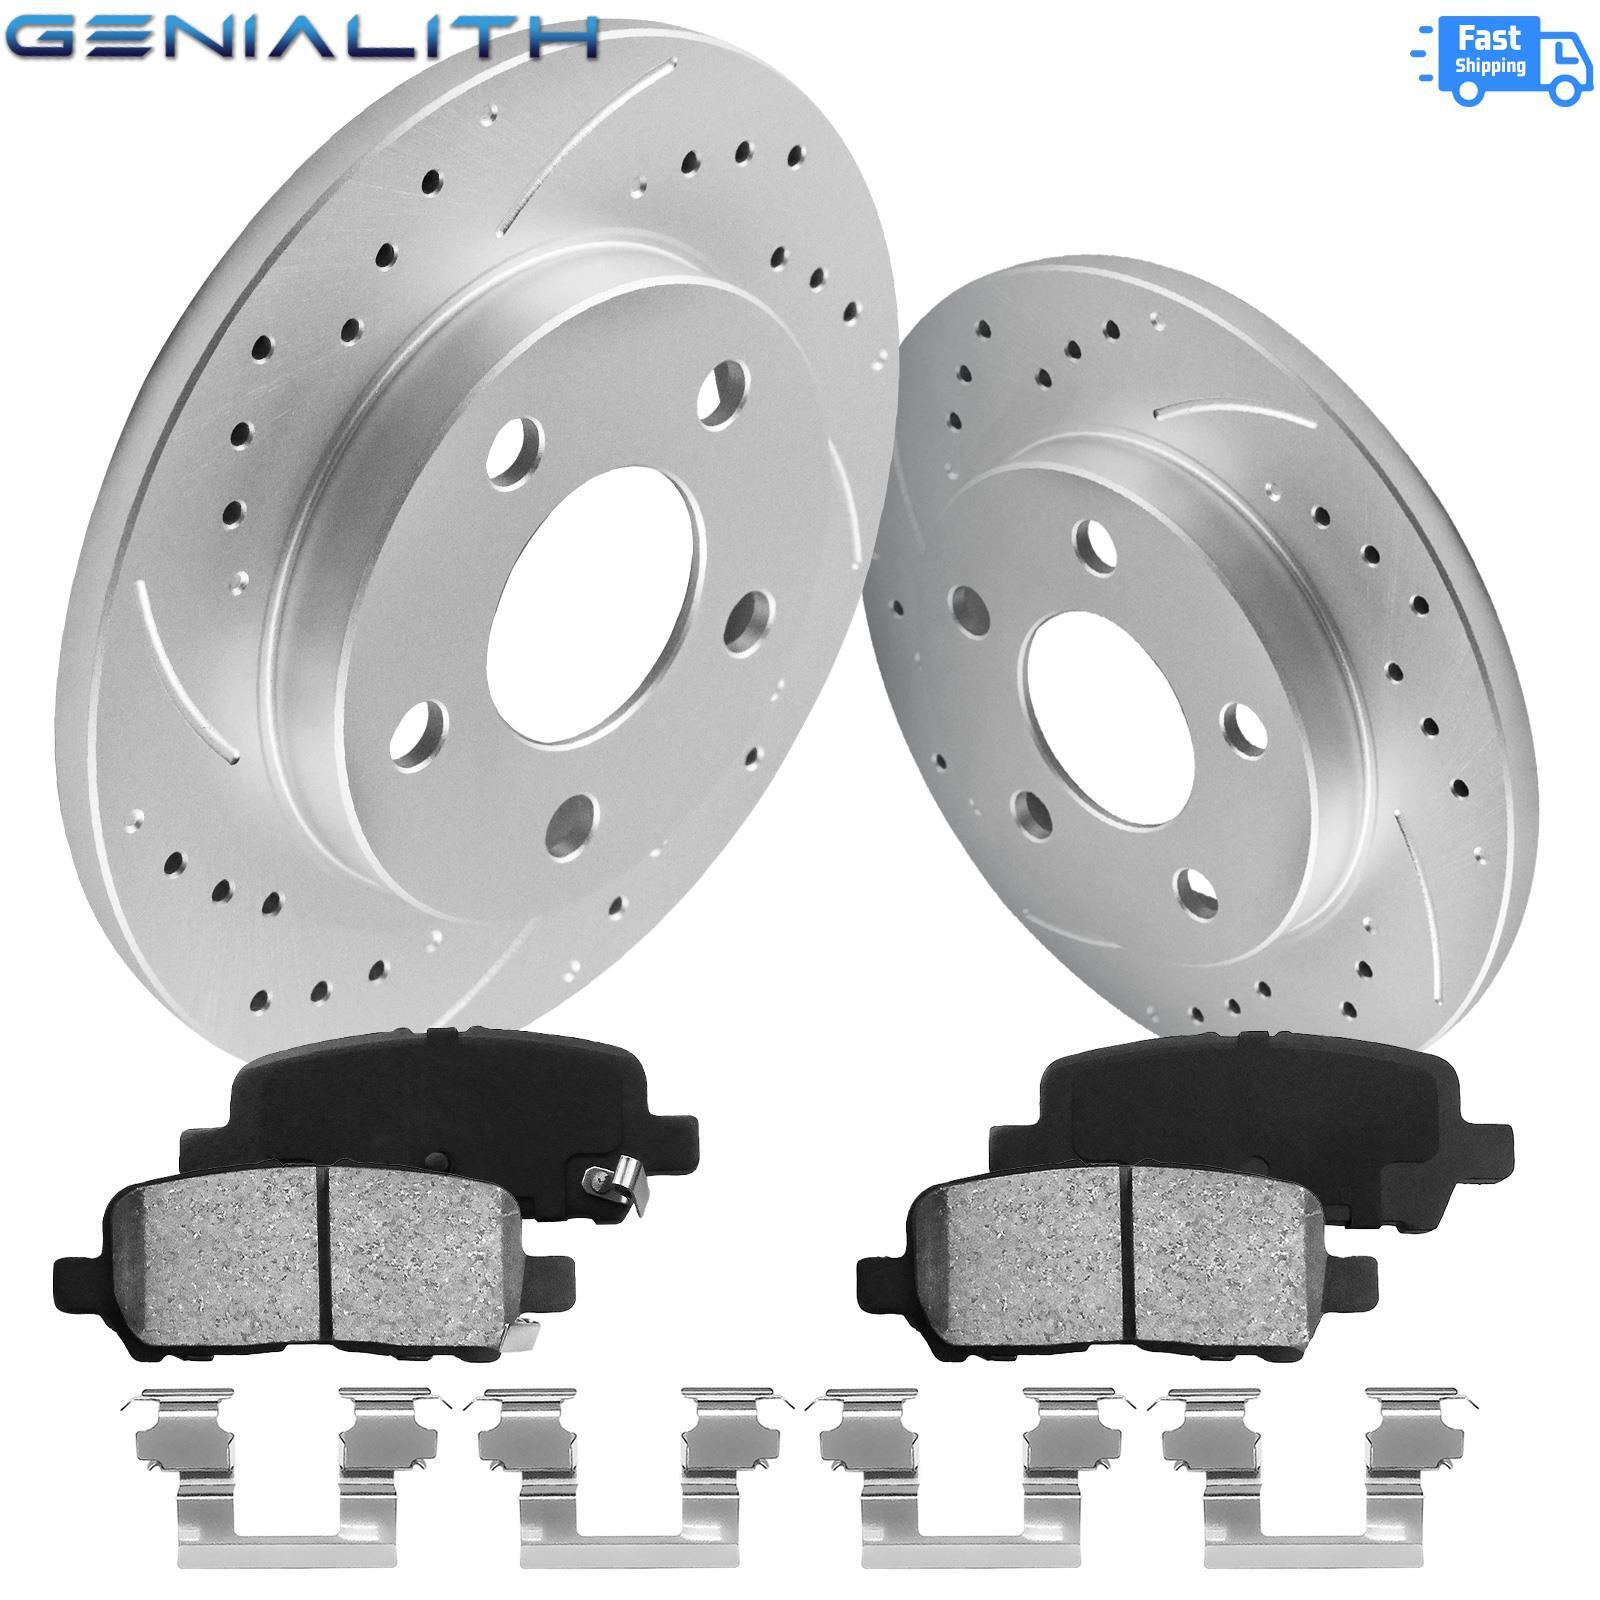 270mm Front G-coated Brake Rotors & Pads For Buick Pontiac Grand Prix 2004-2009